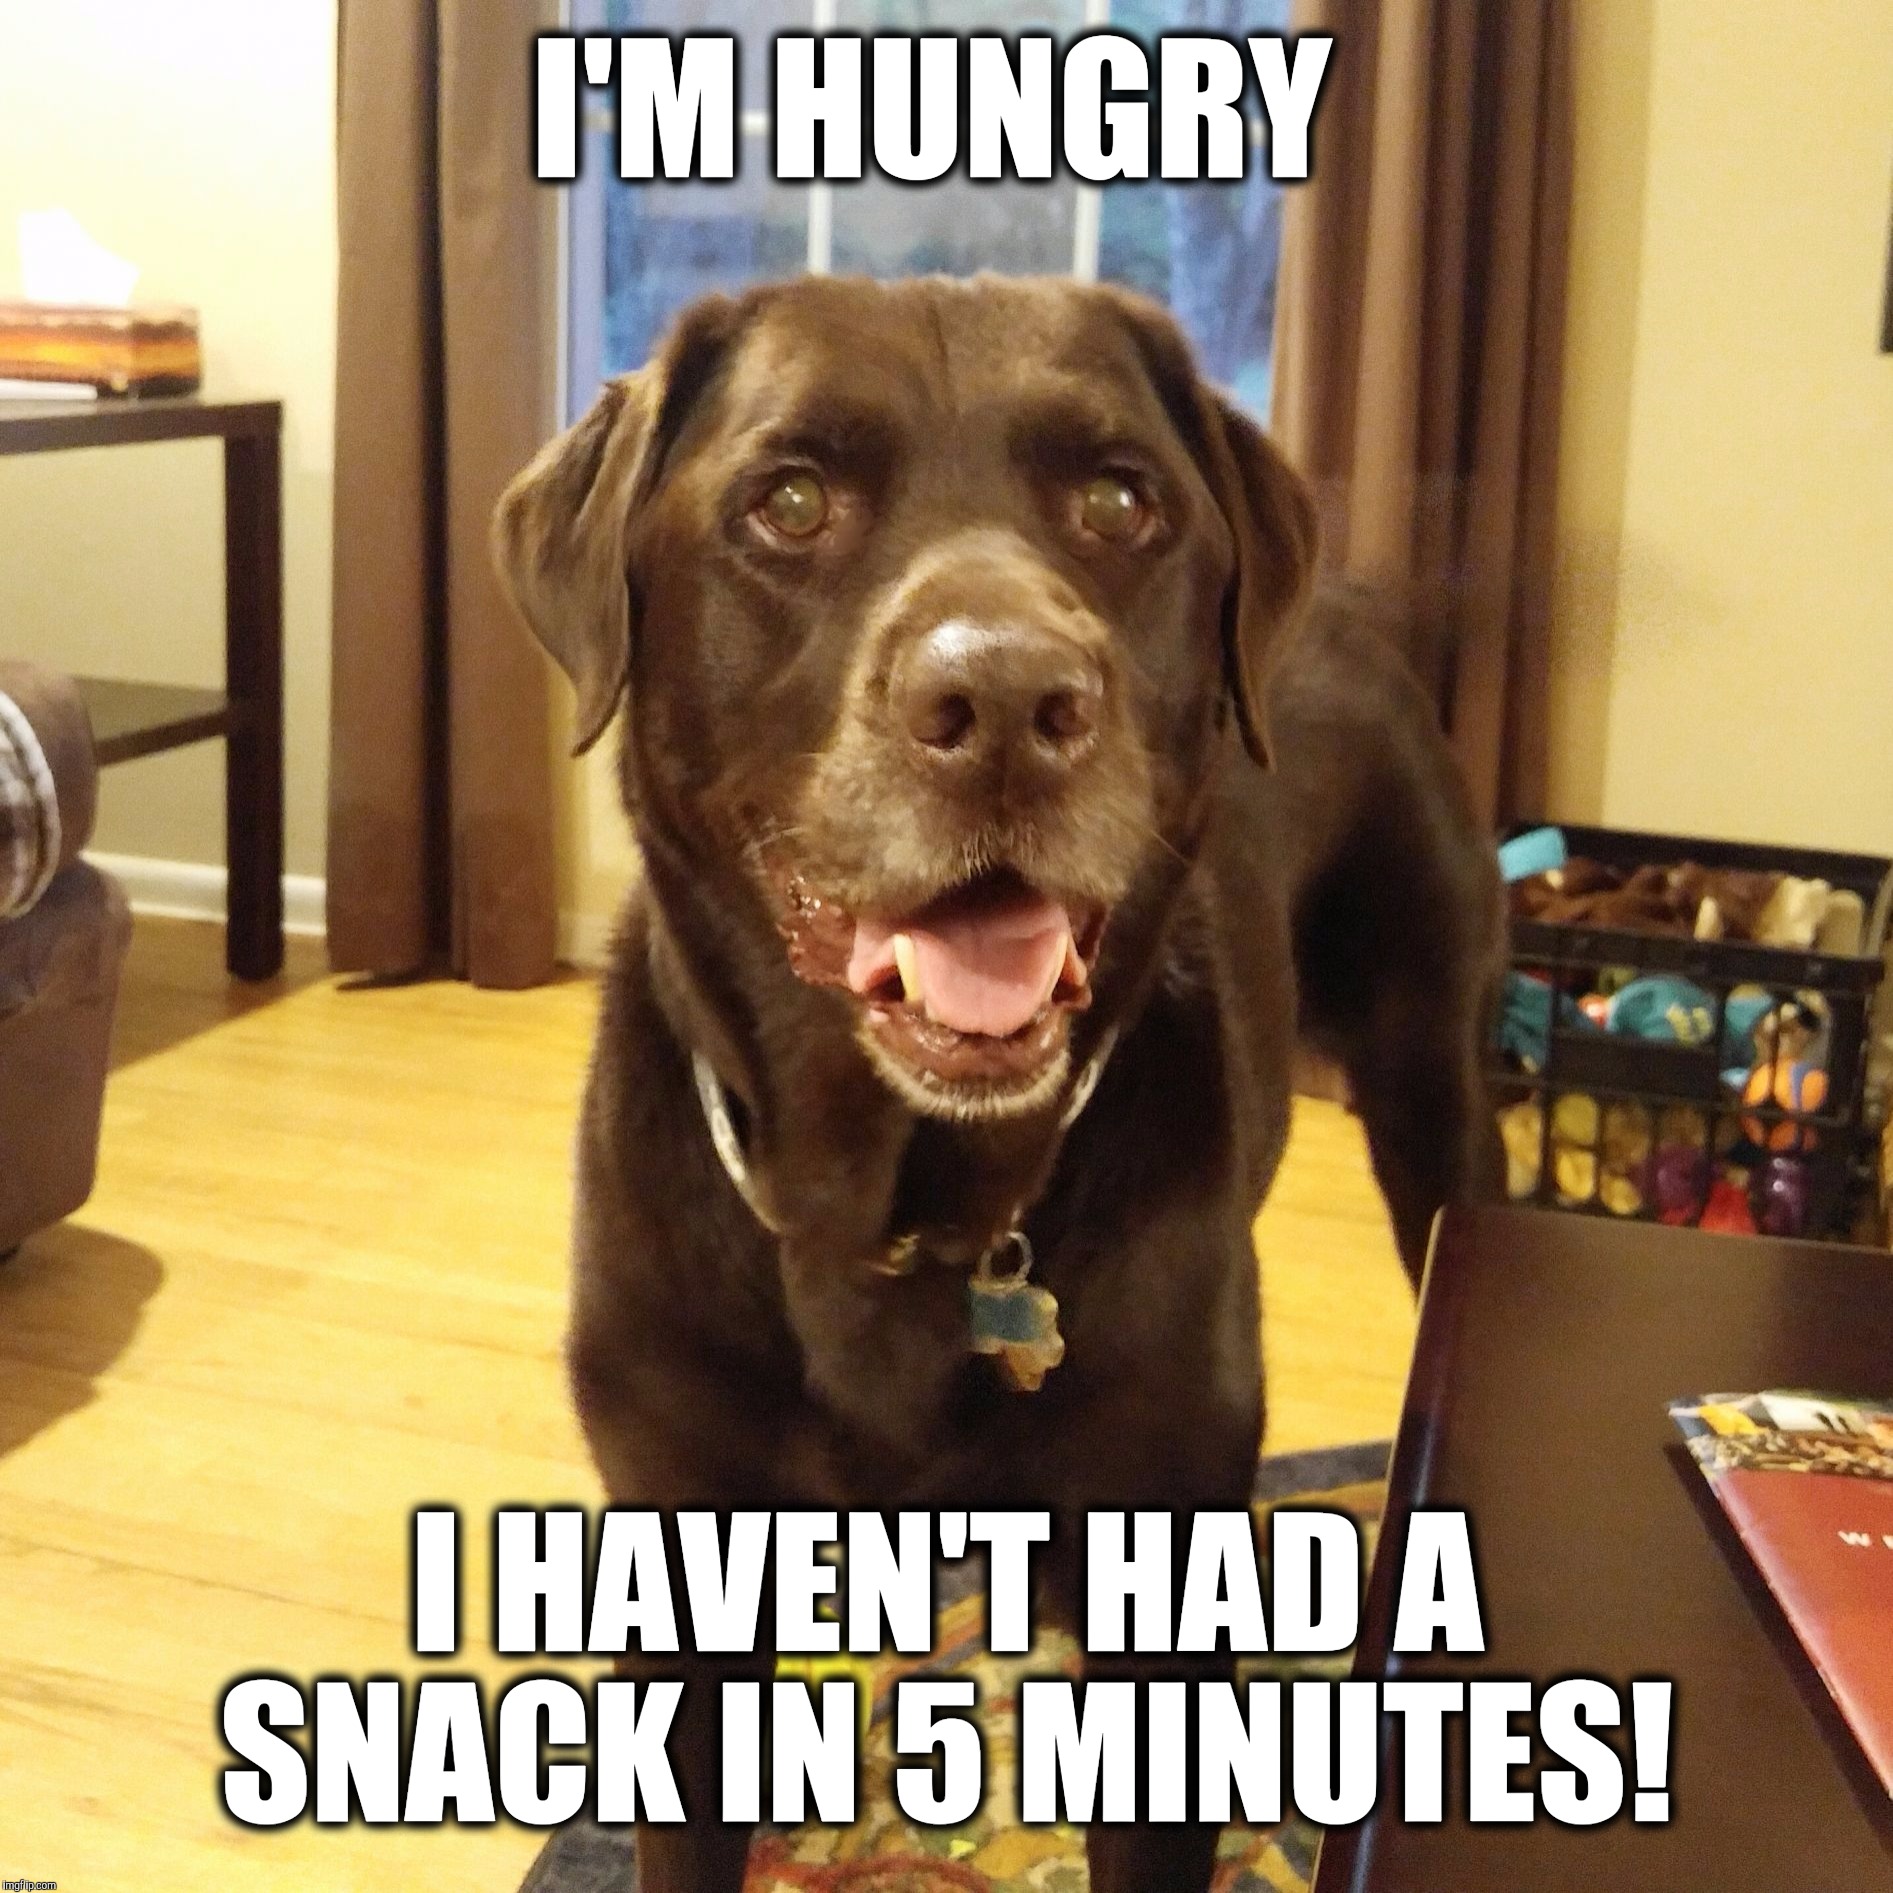 I'm hungry! Imgflip